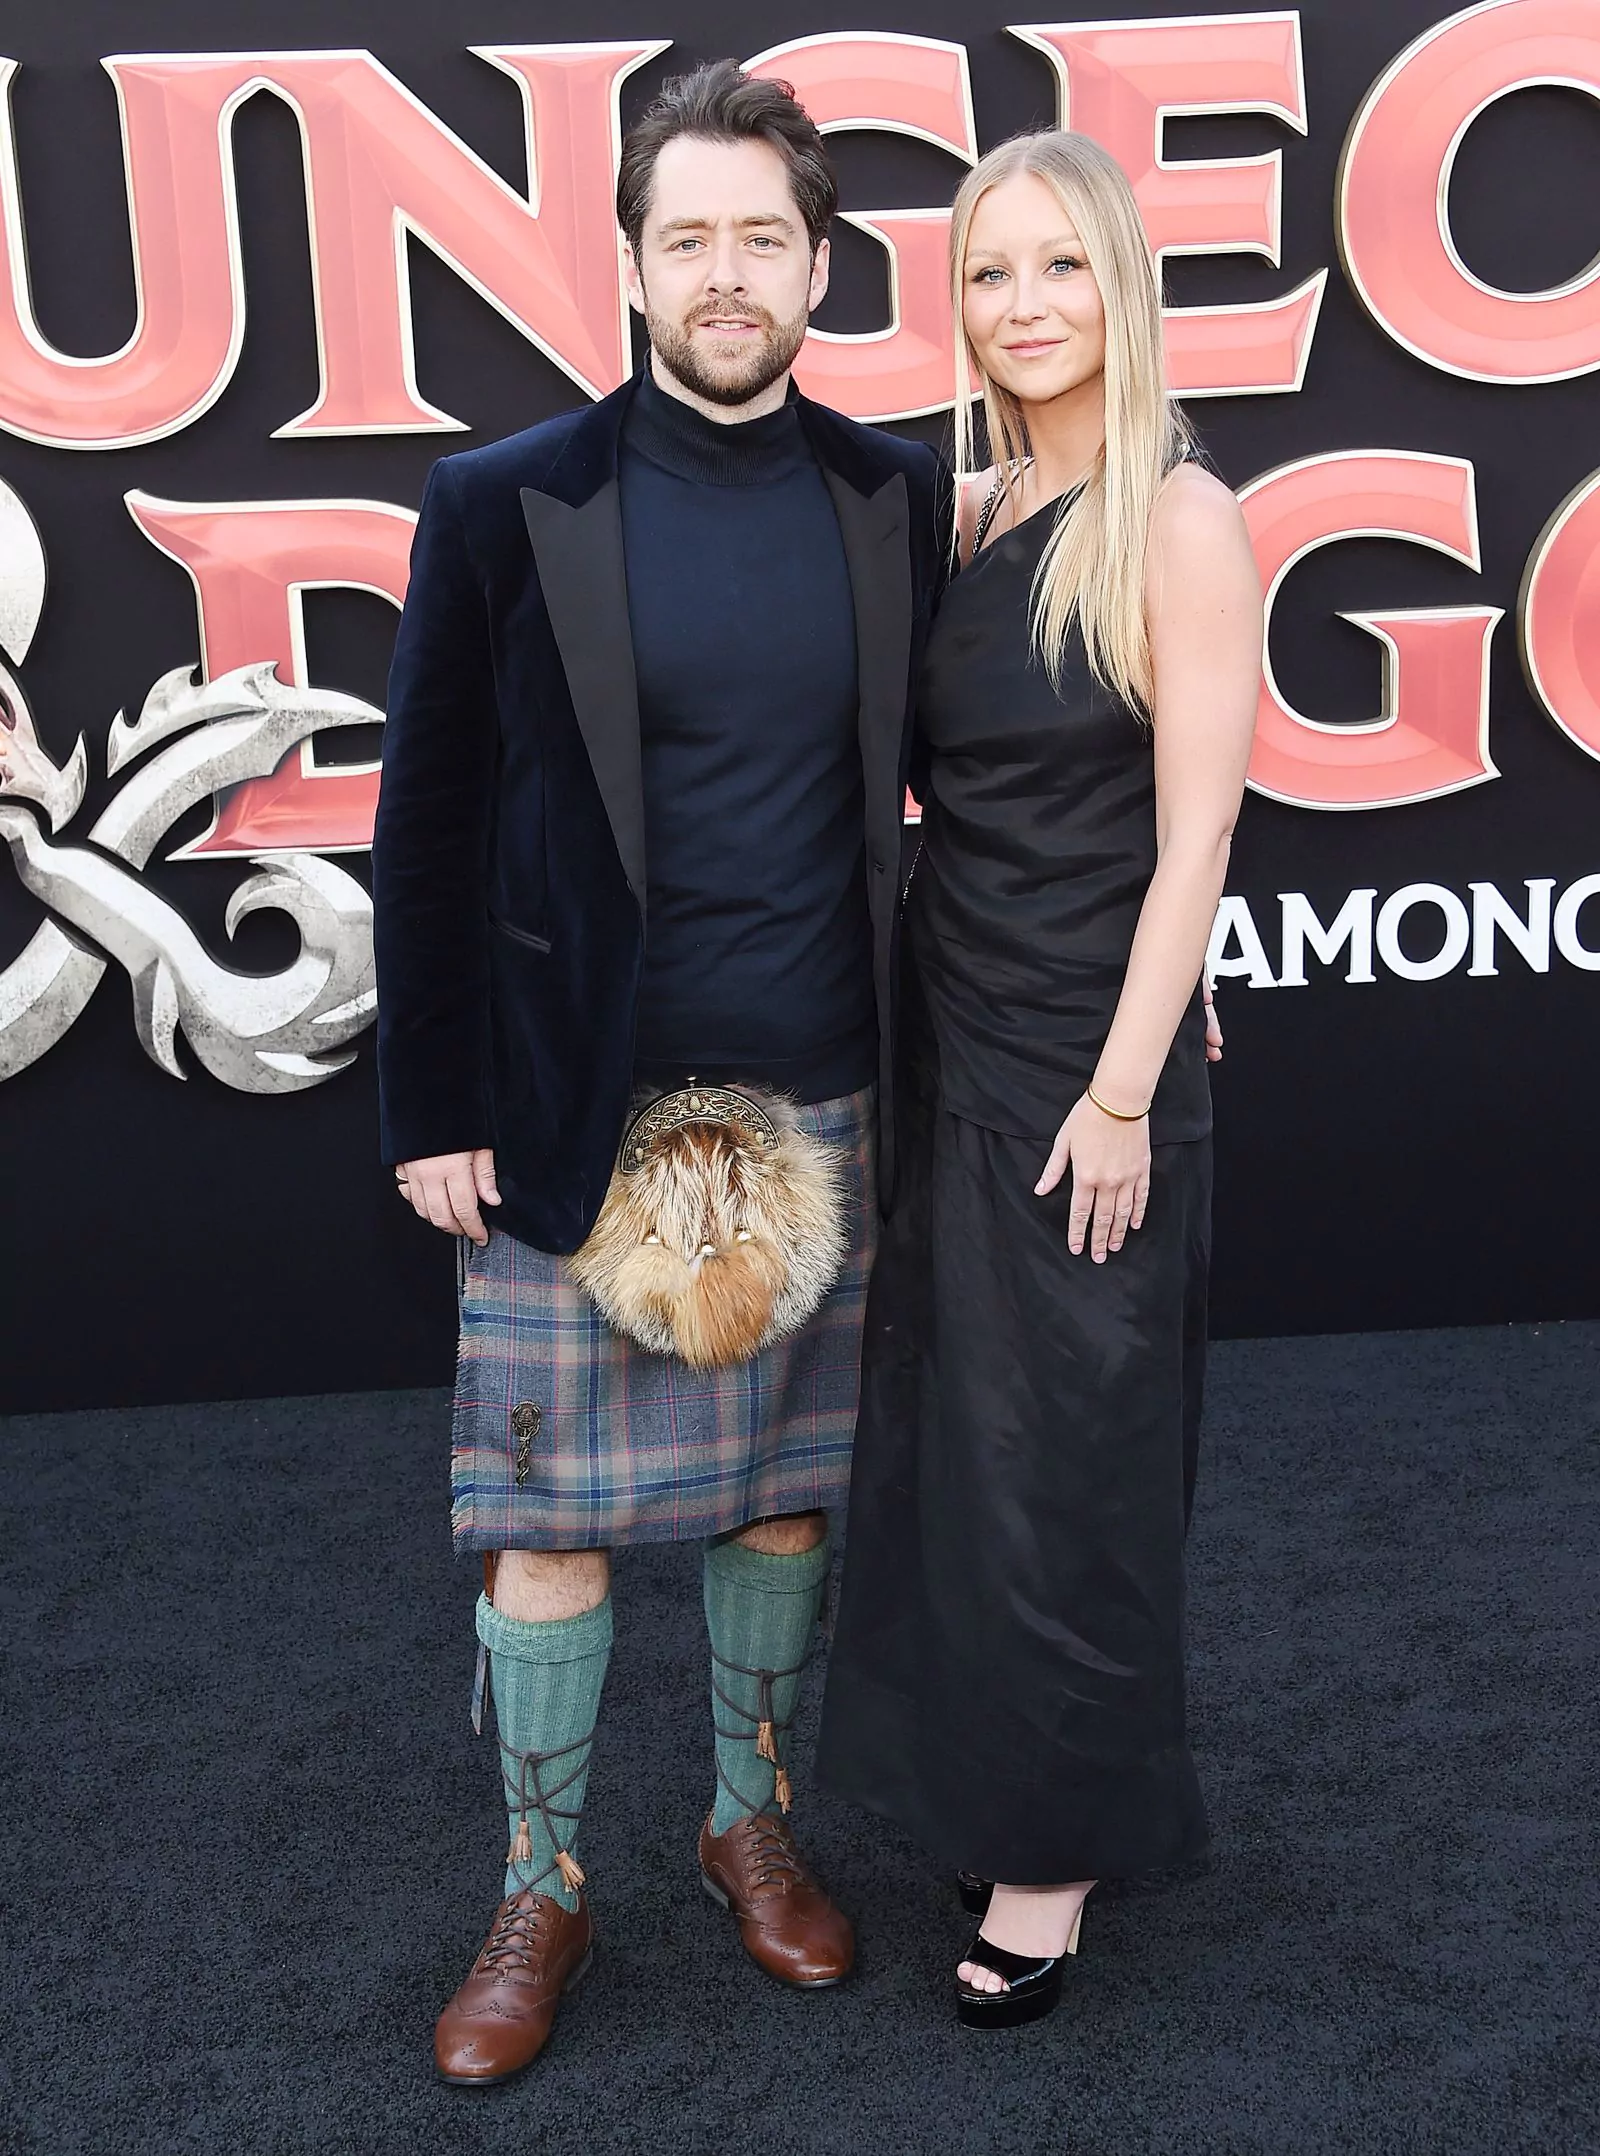 Richard Rankin and Sammy Russell attend the premiere of Dungeons & Dragons: Honor Among Thieves in Los Angeles on March 26, 2023.